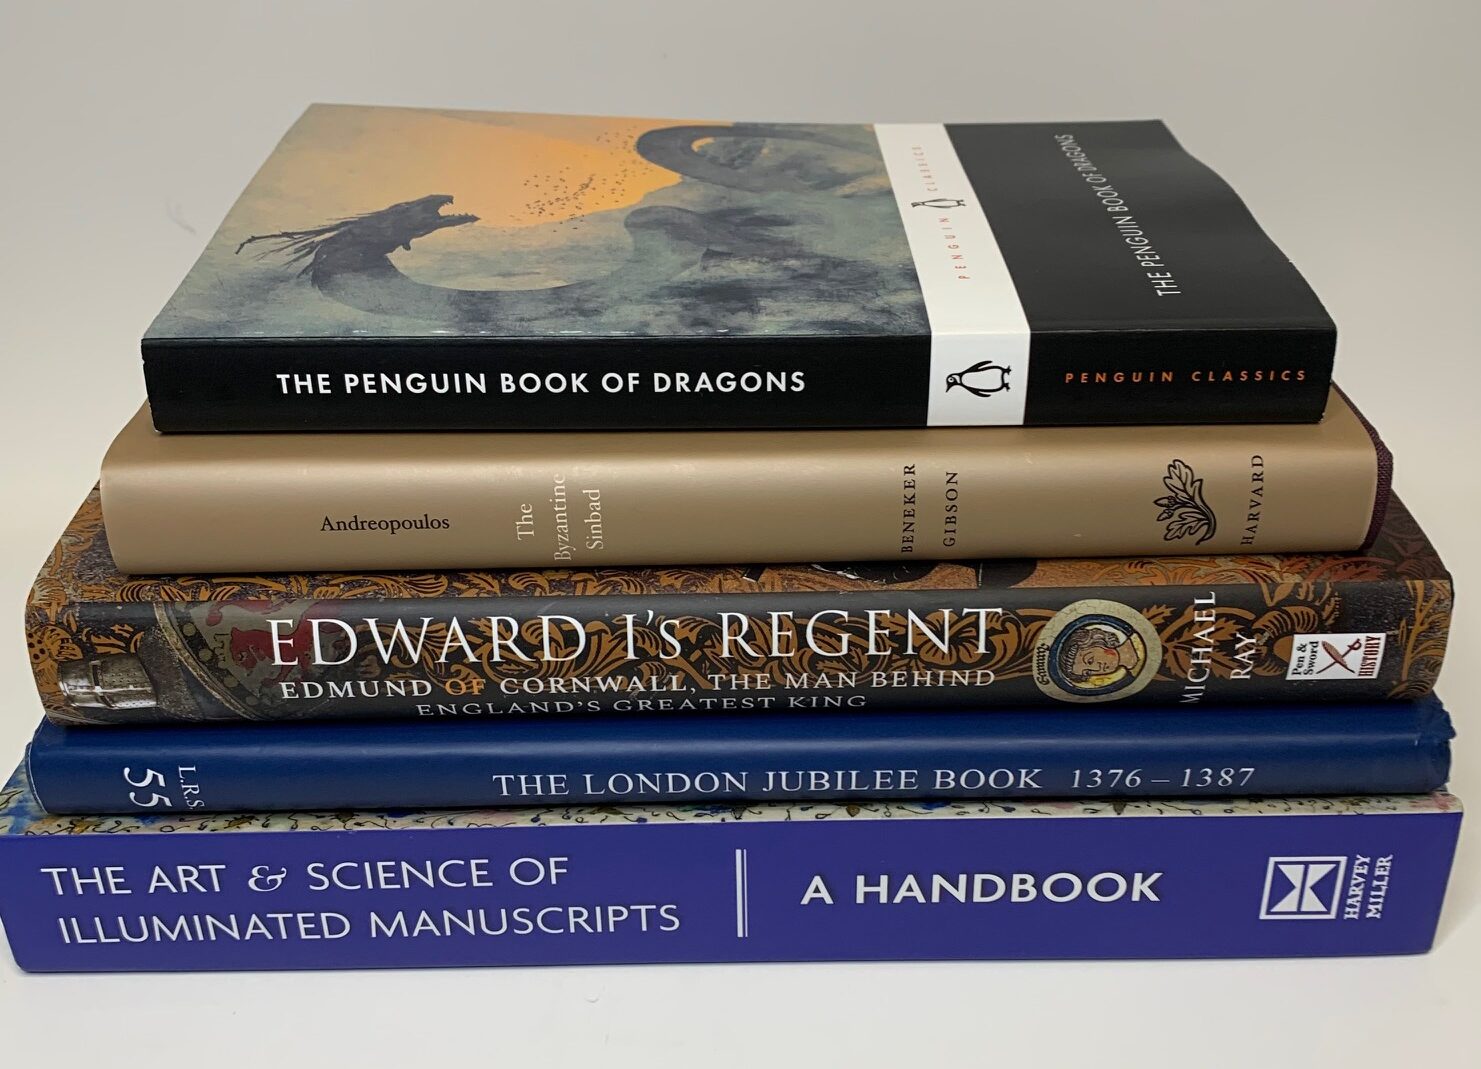 New Medieval Books: Here Be Dragons and City Politics